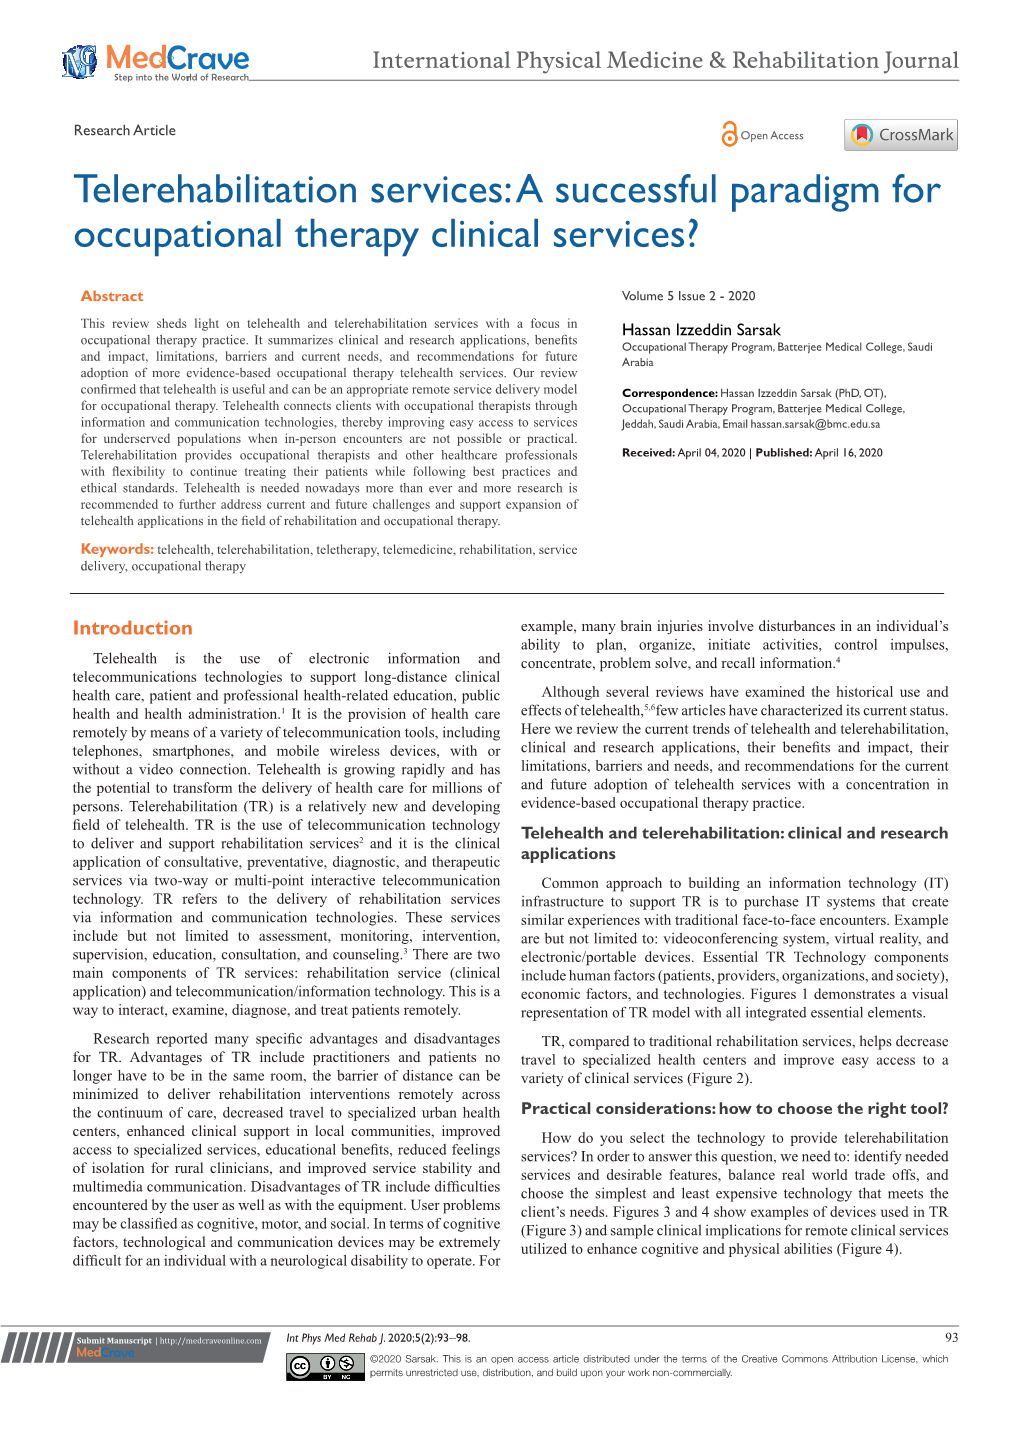 Telerehabilitation Services: a Successful Paradigm for Occupational Therapy Clinical Services?